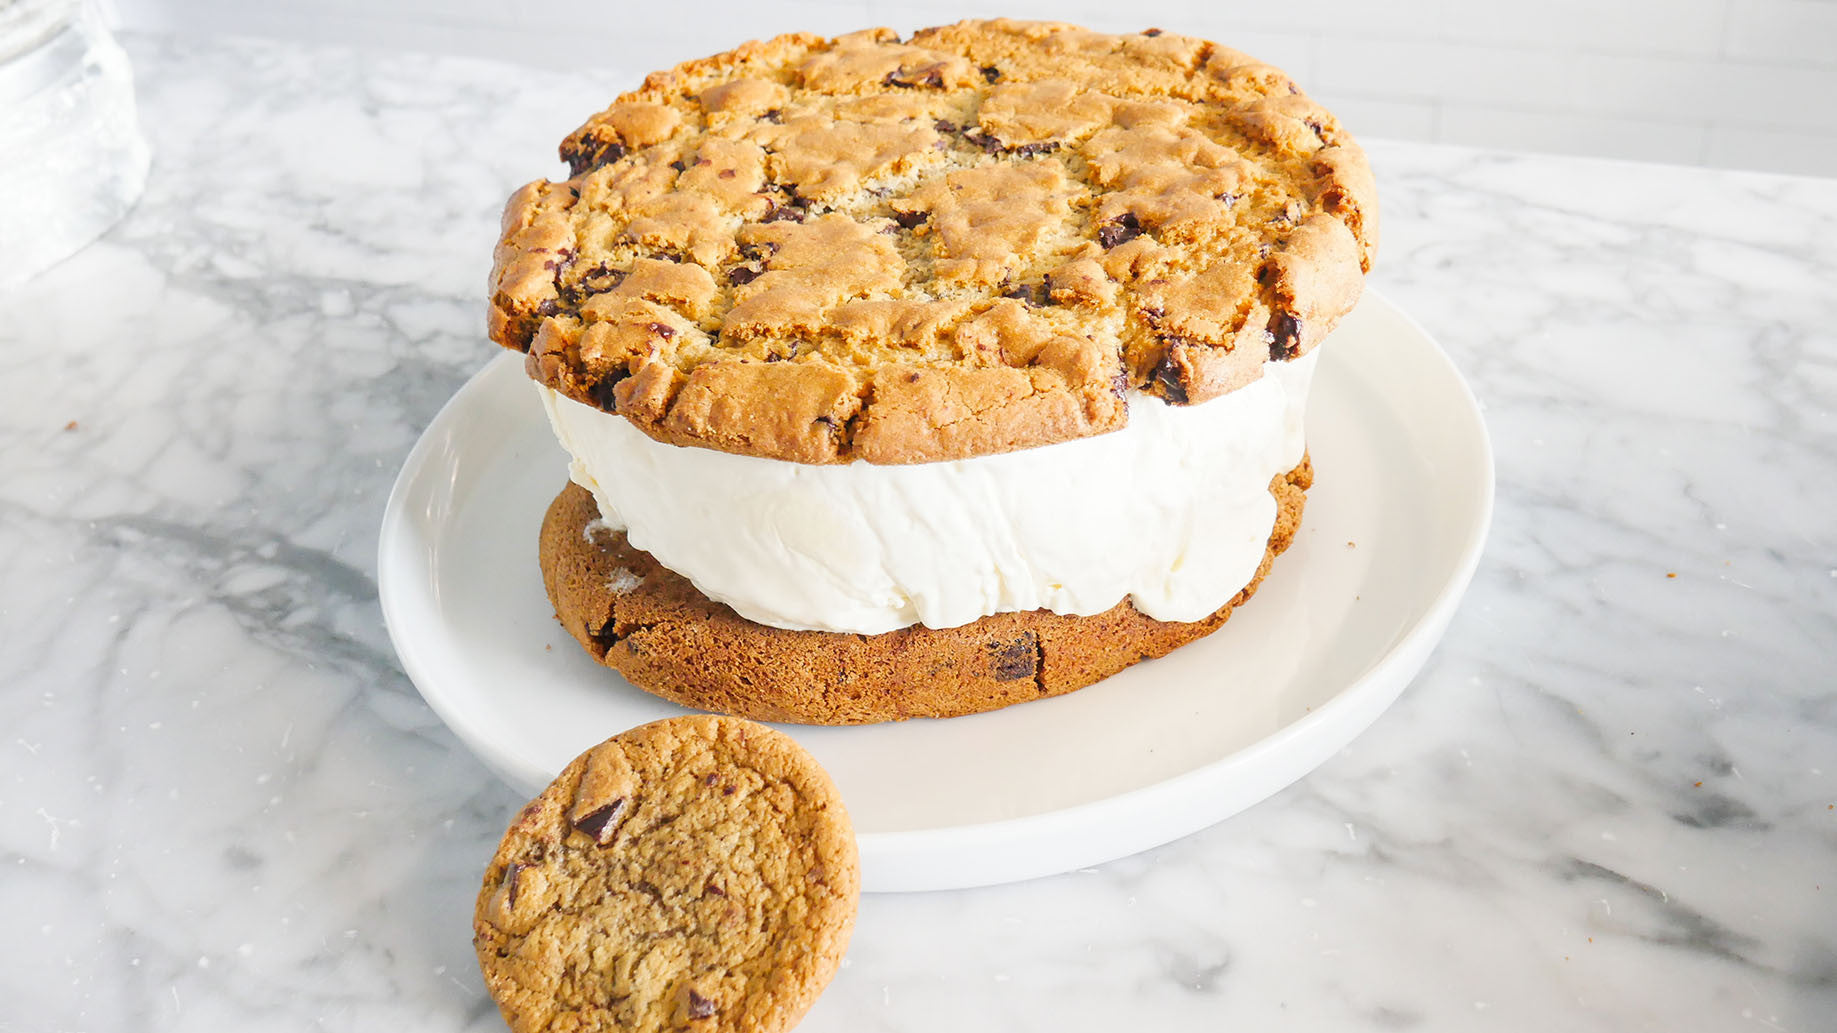 At the Feed Your Soul Test Kitchen: Baking Giant Cookies + 1 Gallon of Ice Cream !?!?